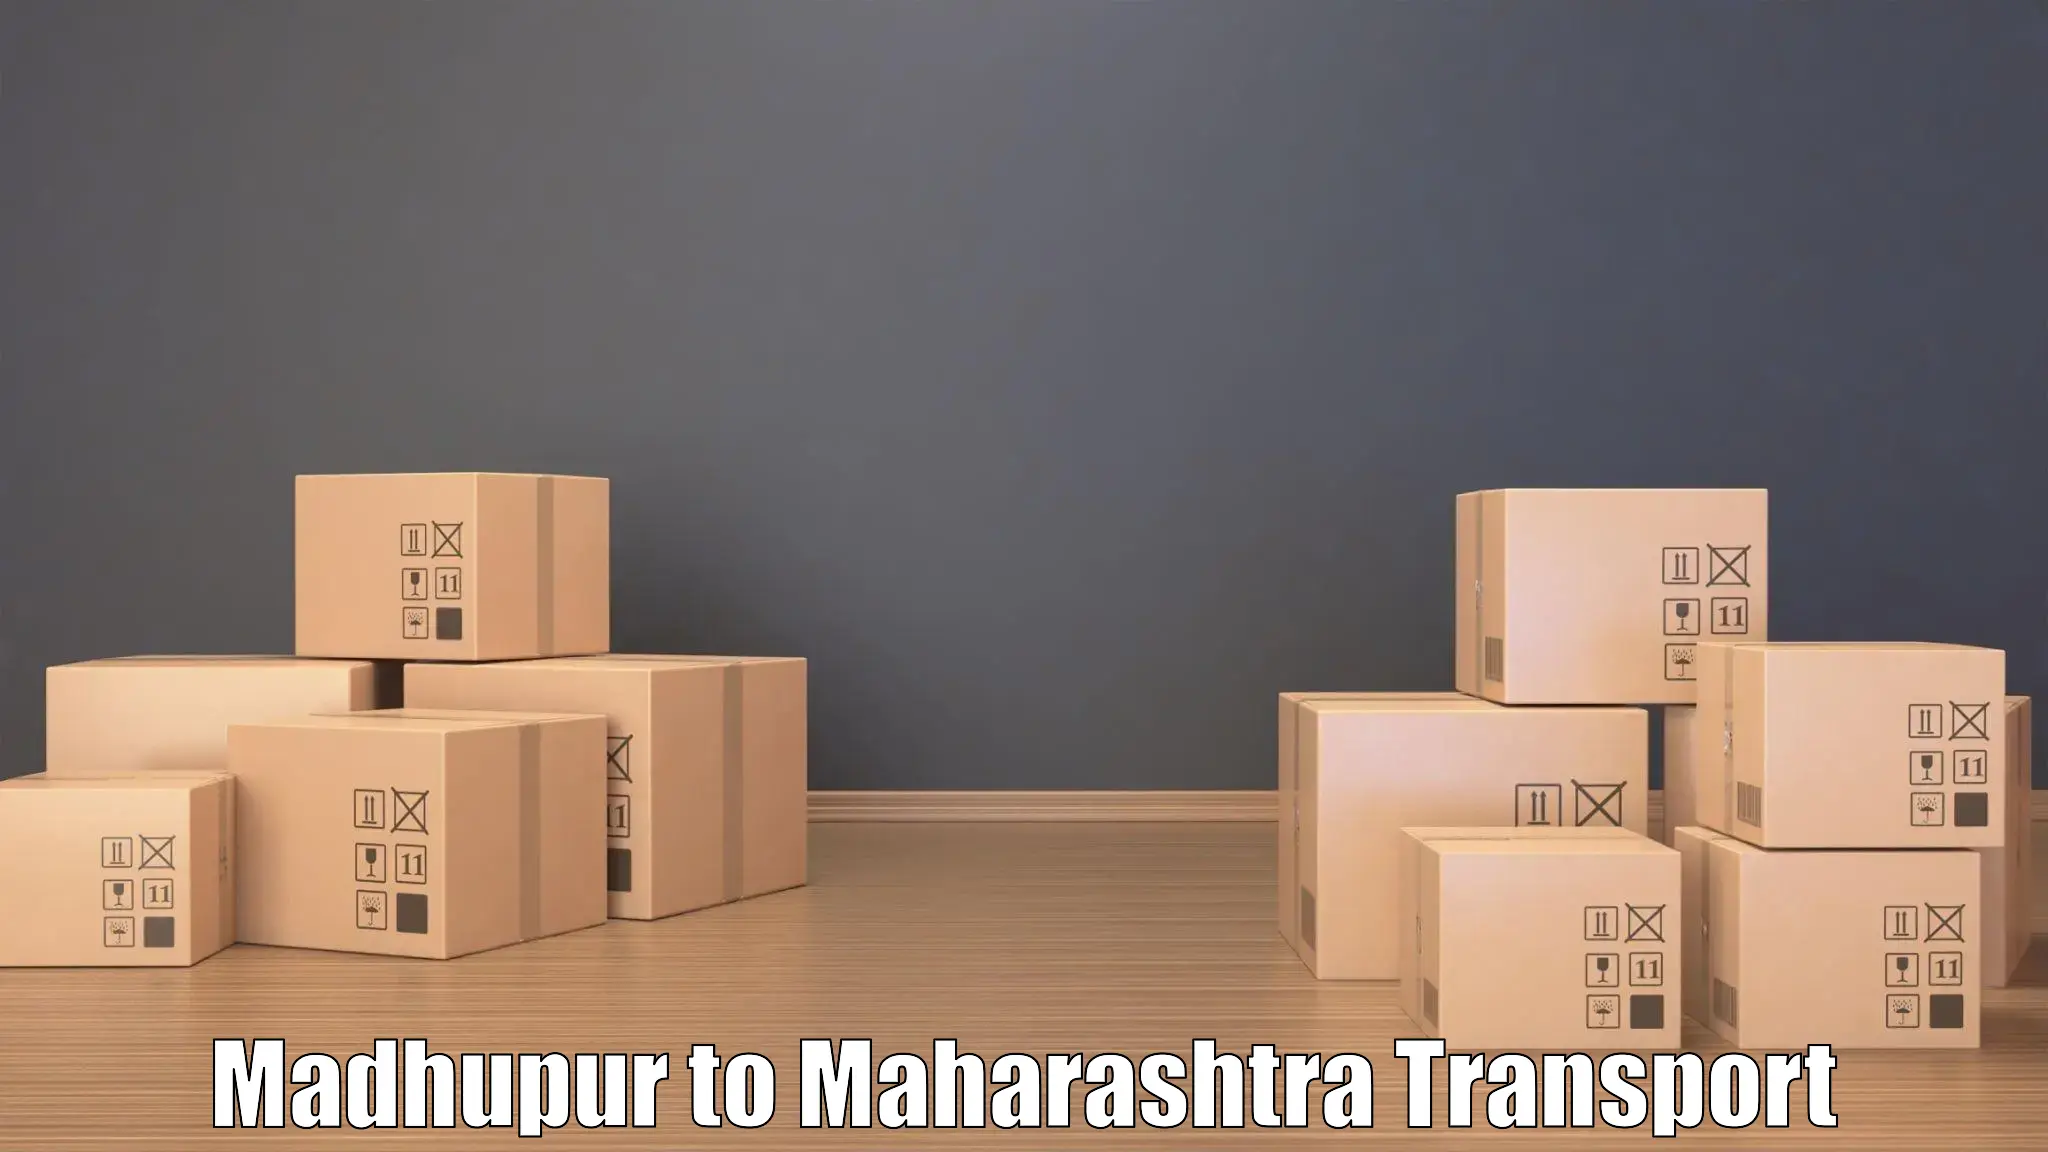 Air freight transport services in Madhupur to Mumbai